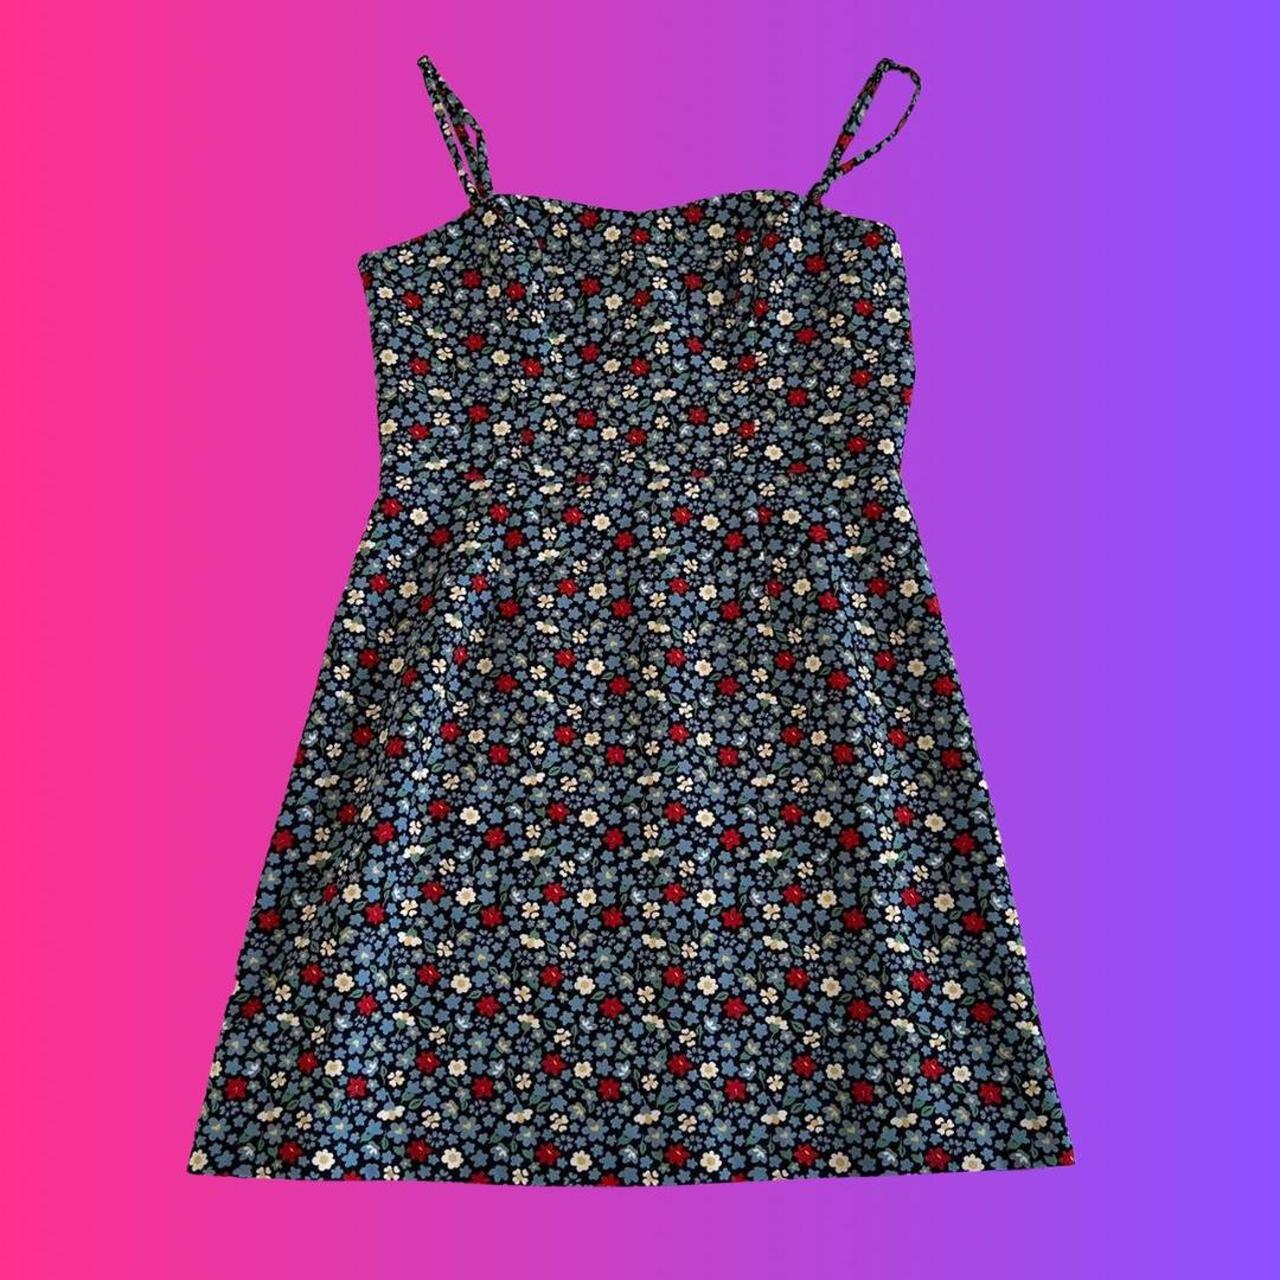 French Connection - Perfect fall dress - size... - Depop